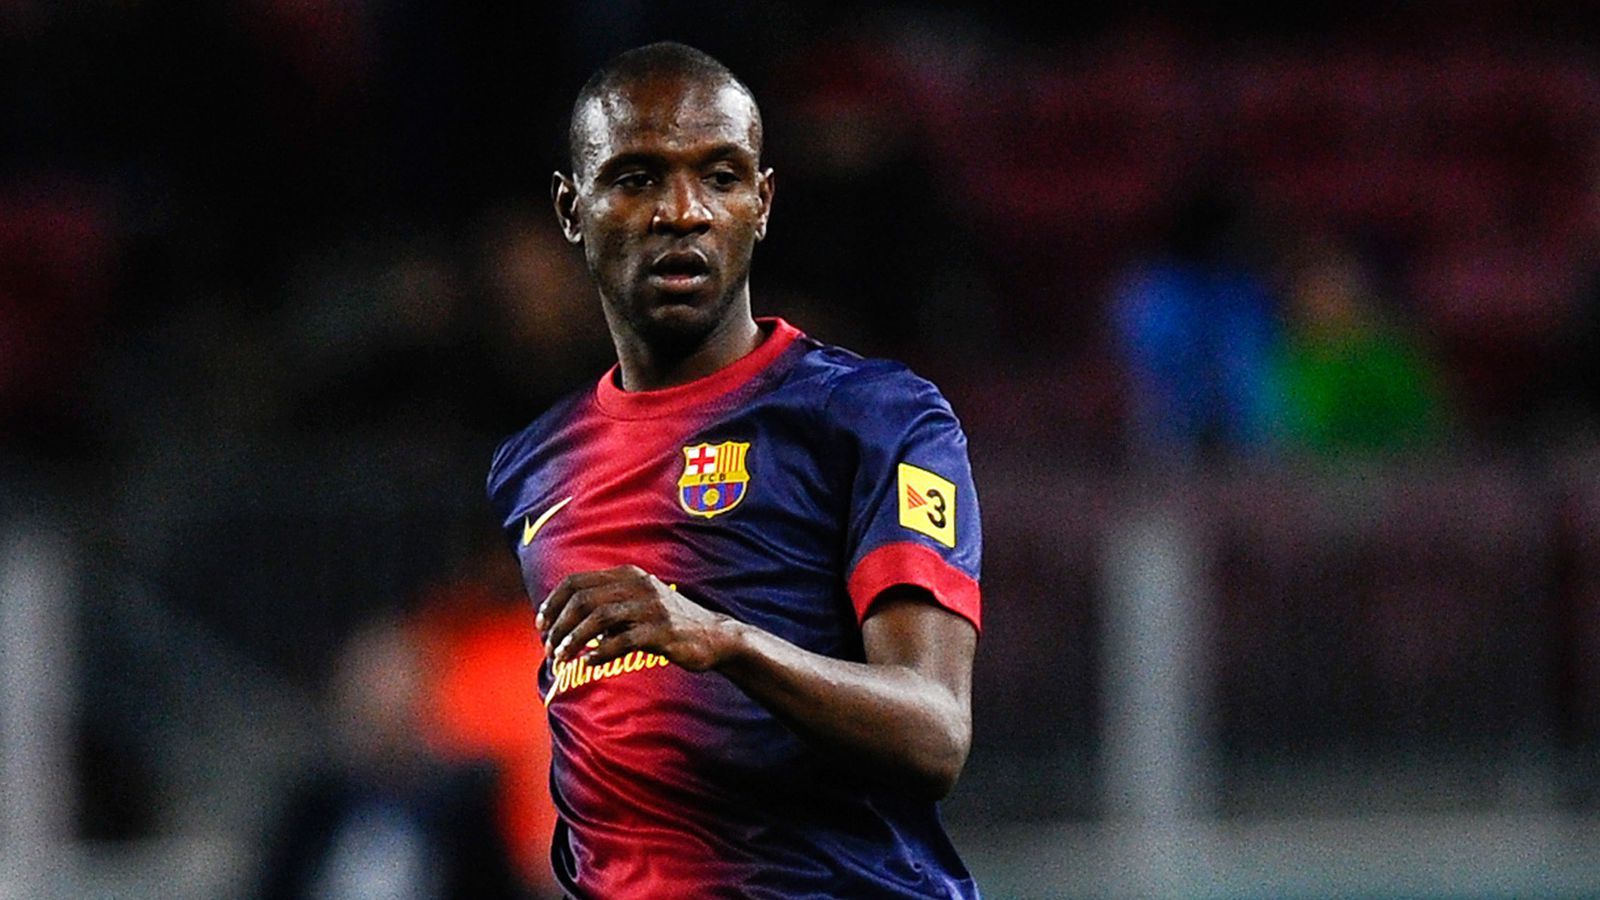 Eric Abidal signs with AS Monaco on a free transfer